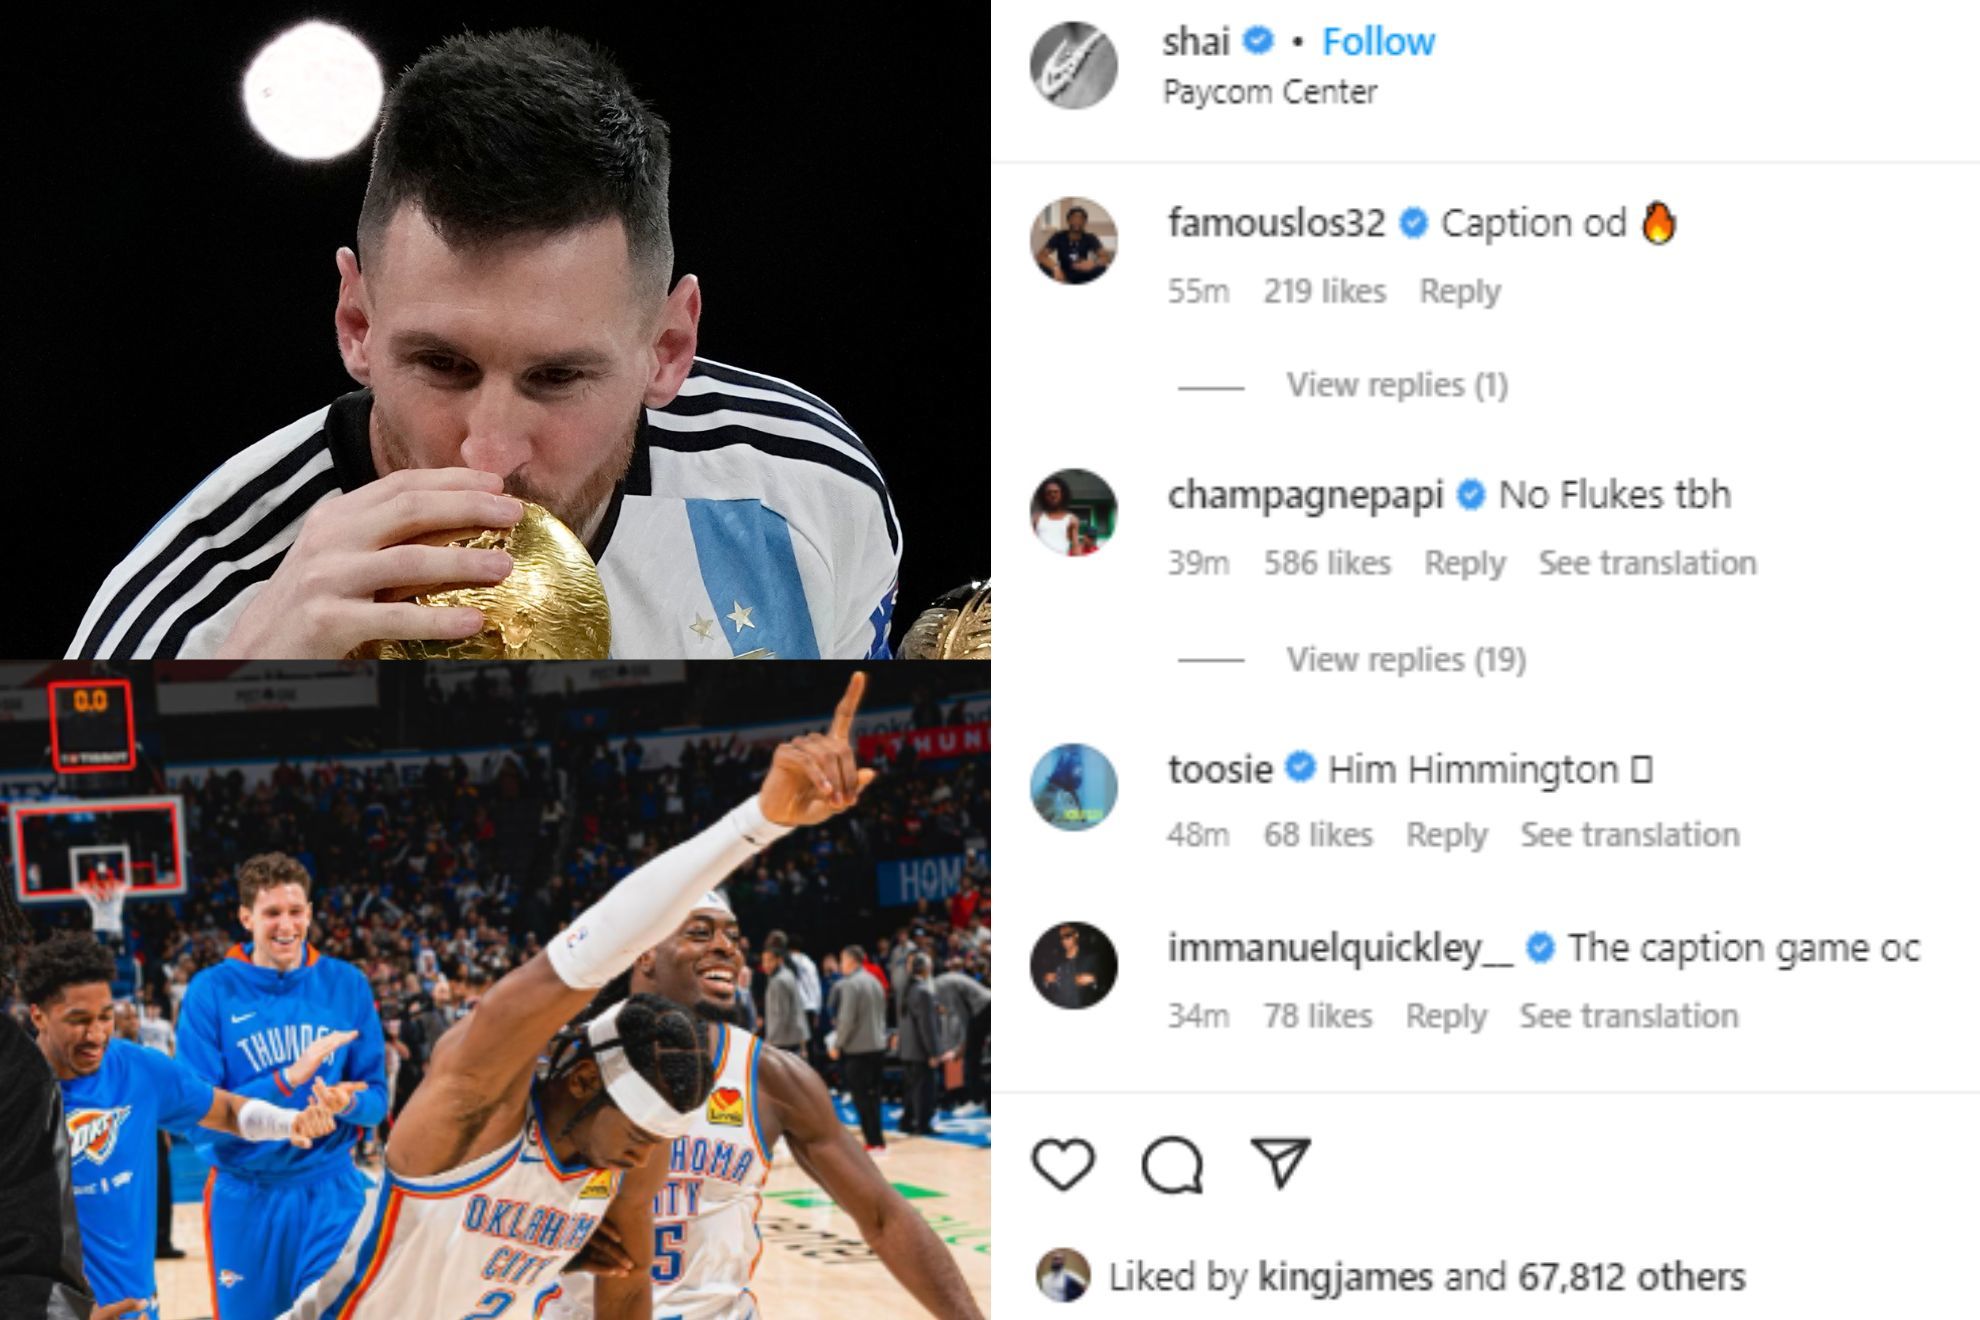 Lionel Messi (top left) and Shai Gilgeous-Alexander (bottom left)